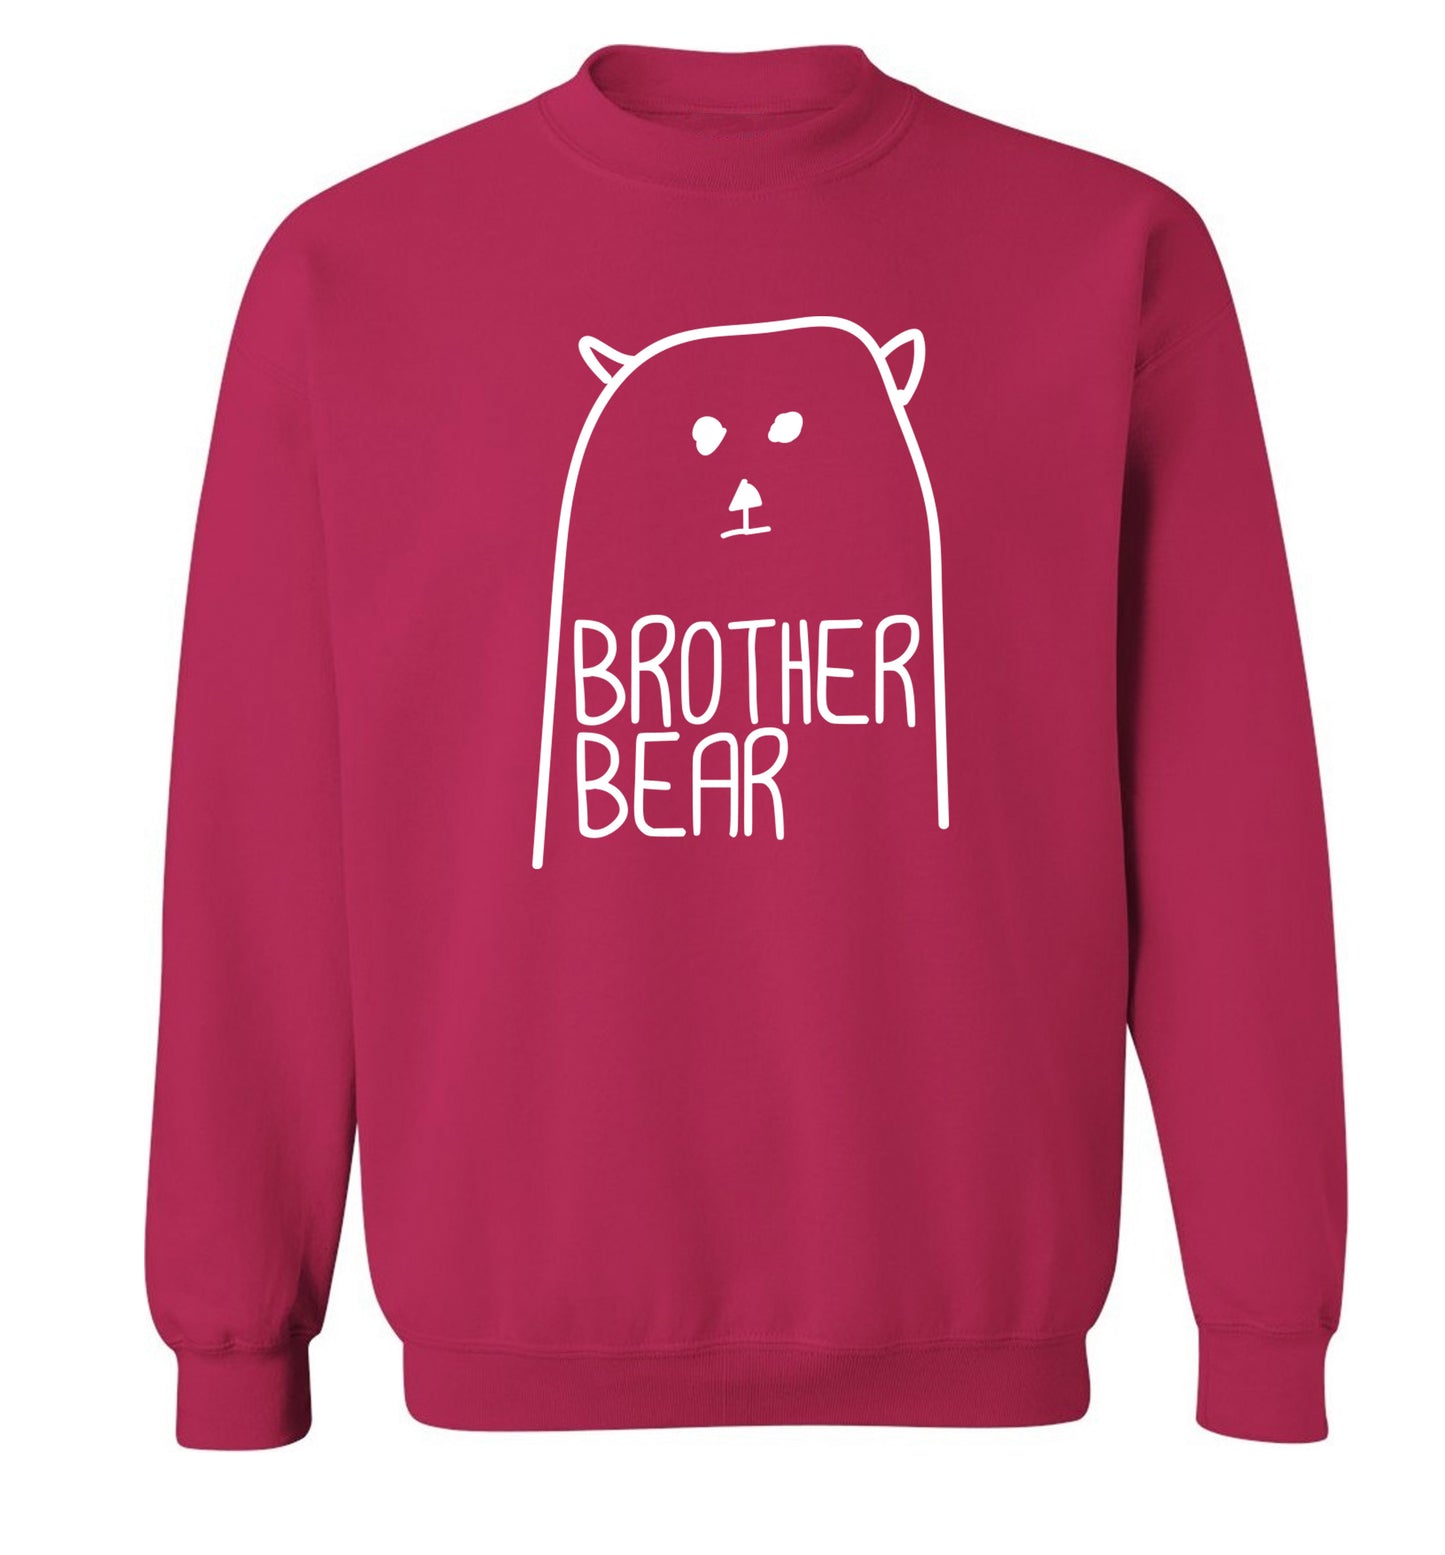 Brother bear Adult's unisex pink Sweater 2XL